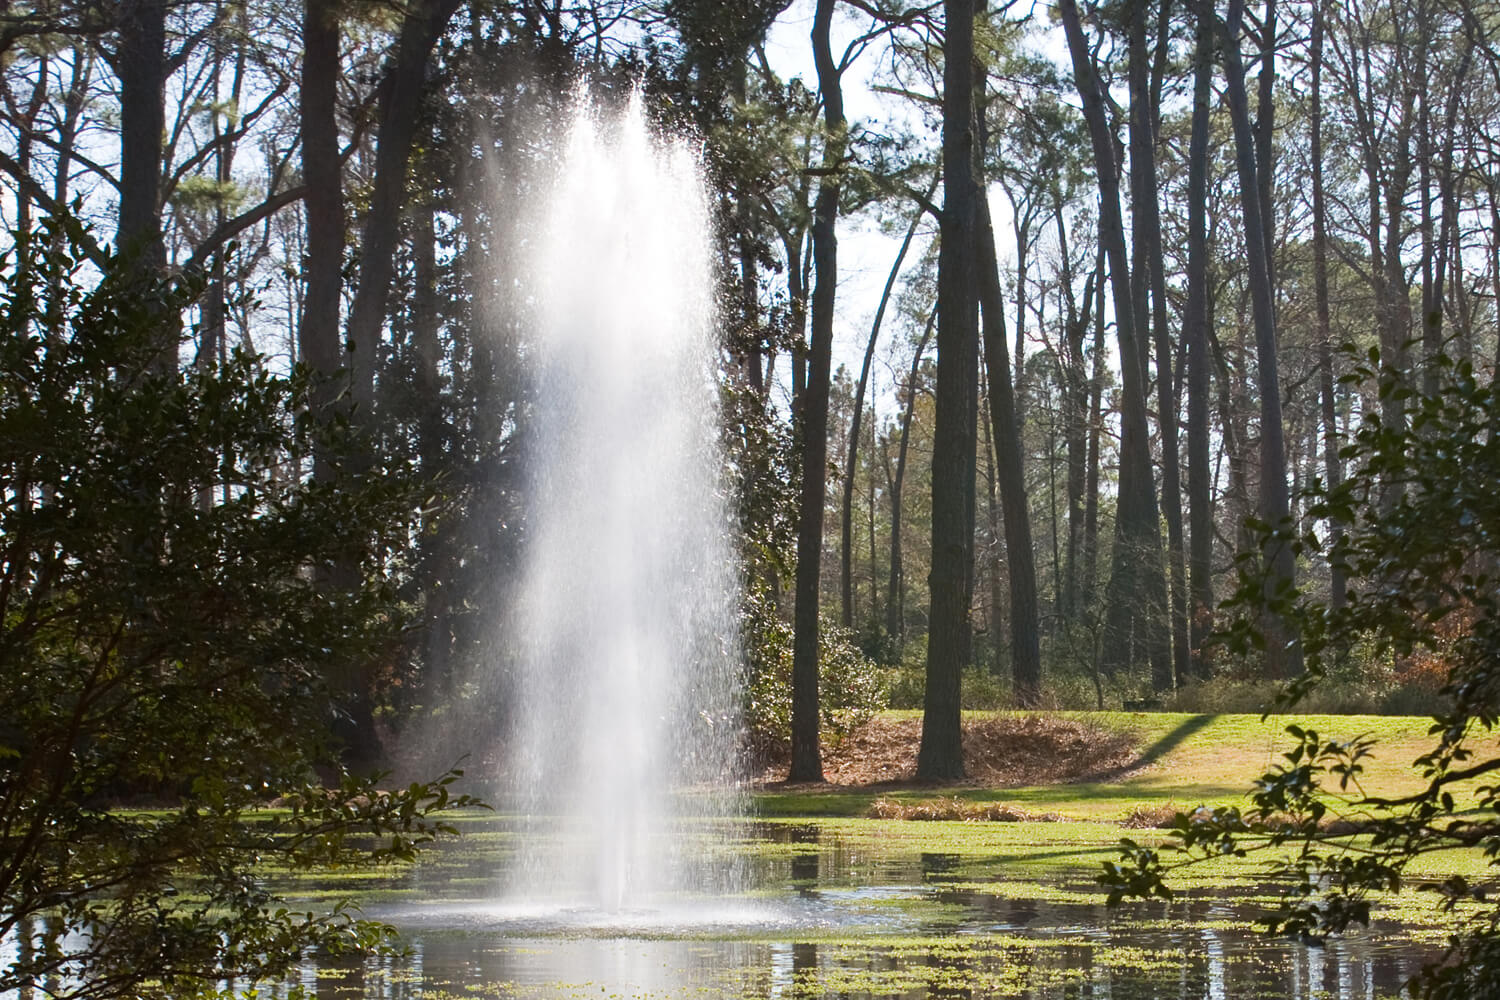 One of Otterbine's Rocket Aerating Fountains